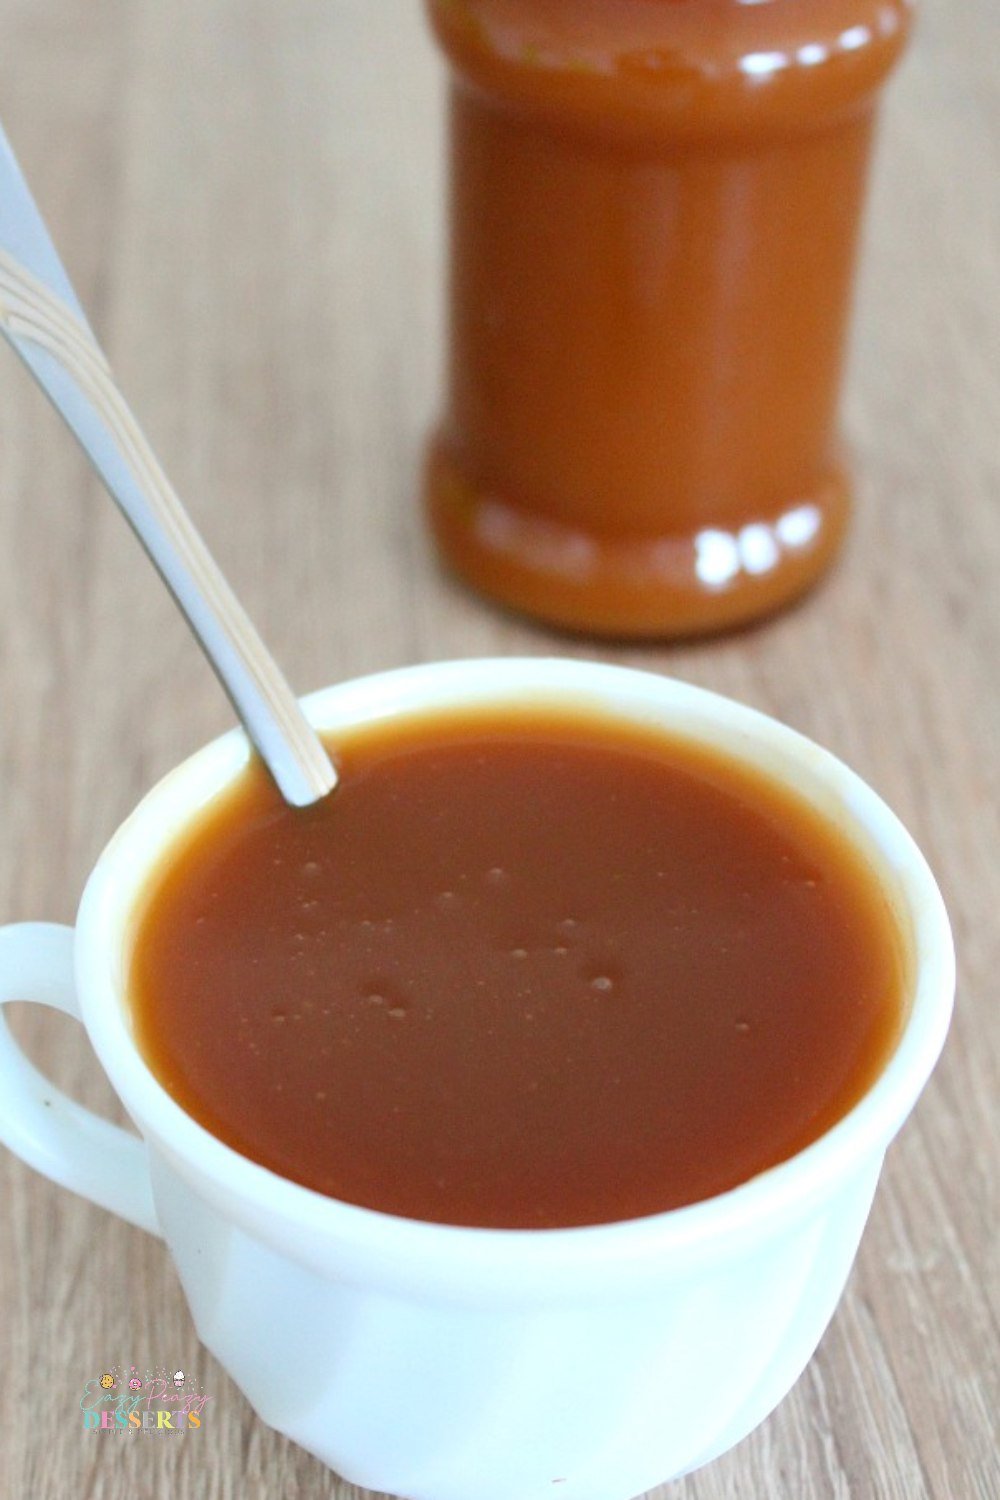 Salted caramel sauce in a cup